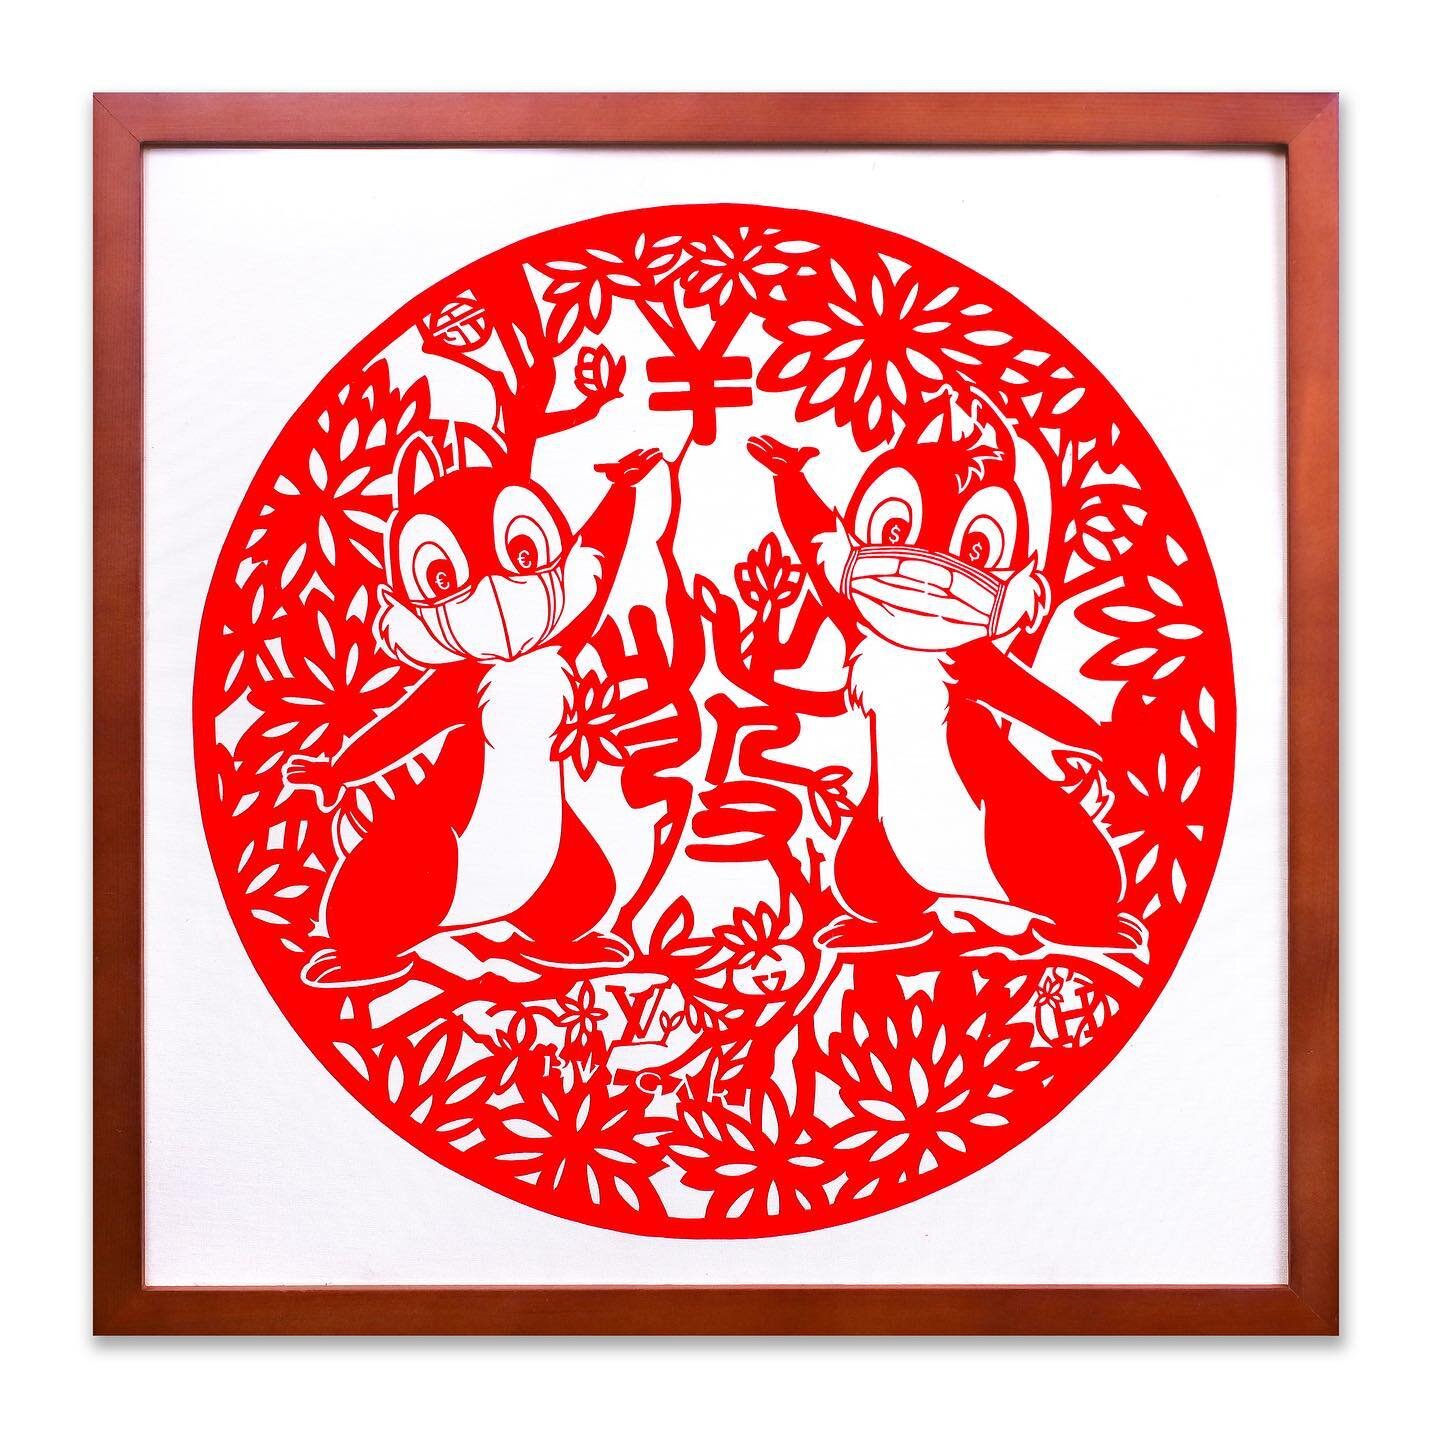 🐿📈
⠀⠀⠀⠀⠀⠀⠀⠀⠀⠀⠀
⠀⠀⠀⠀⠀⠀⠀⠀⠀⠀⠀
⠀⠀⠀⠀⠀⠀⠀⠀⠀⠀⠀
&lsquo;The Only Way Is Up&rsquo; 2020 
40x40cm / Dyed Rice Papercutting
.
.
.
BLING DYNASTY
FEB 20 - APR 4 @thestallery
( In collaboration w/ @lepiceriefinehk )
.
.
.
#papercut #chineseart #chipanddale #fashio